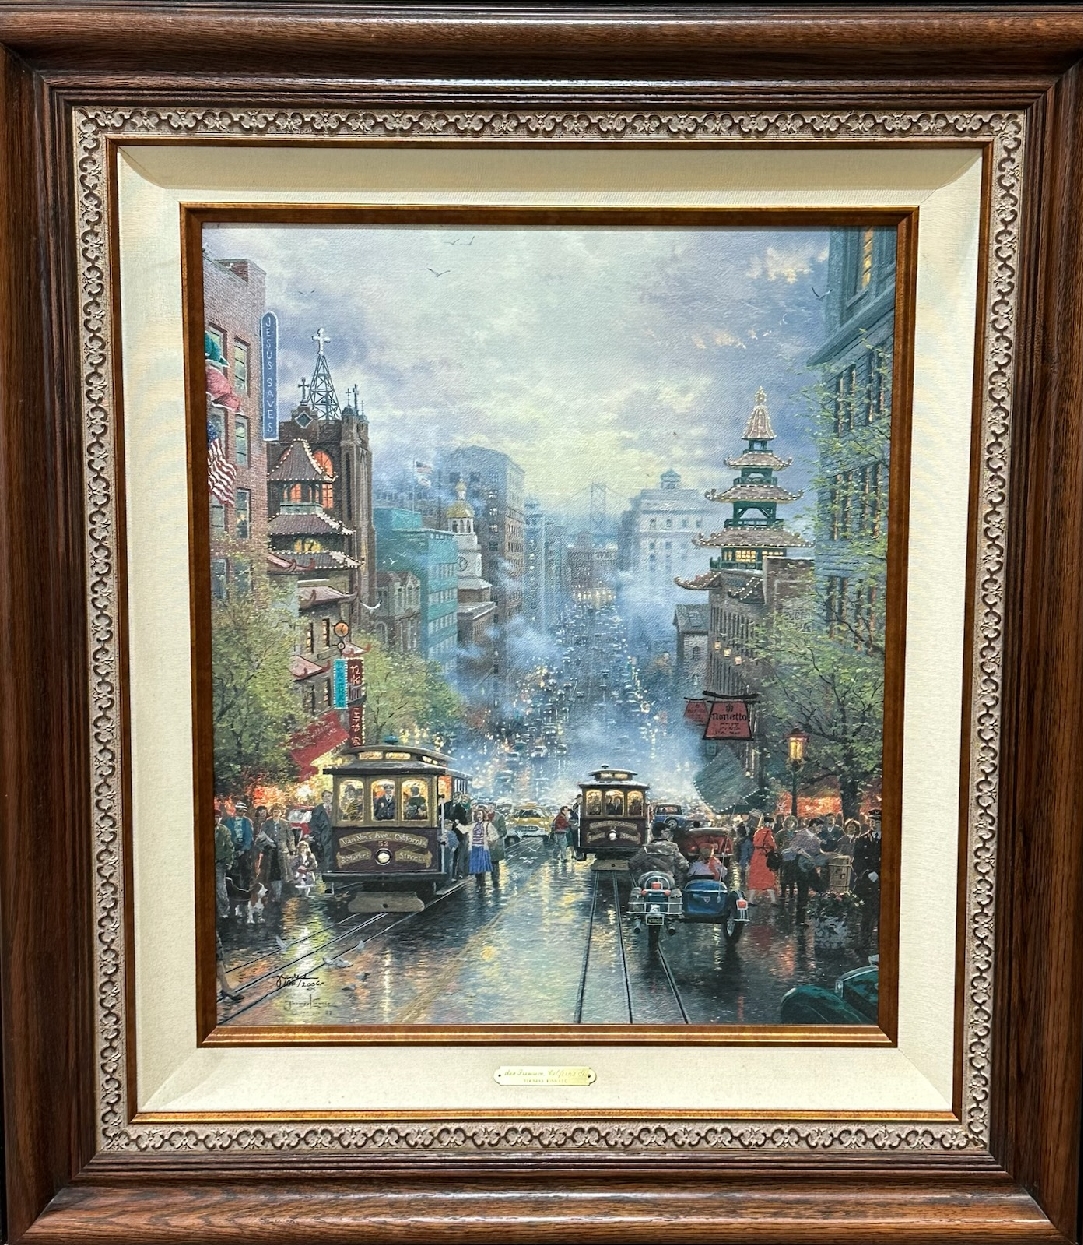 Framed   31.5 x 36in   Limited Edition Thomas Kinkade Lithograph of San Francisco   A View Down California Street From Nob Hill   

Certificate of Limitation and Authenticity 
Thomas Kinkade Master Apprentice Hand-Hilighted Certification
Collectors Fact Sheet 